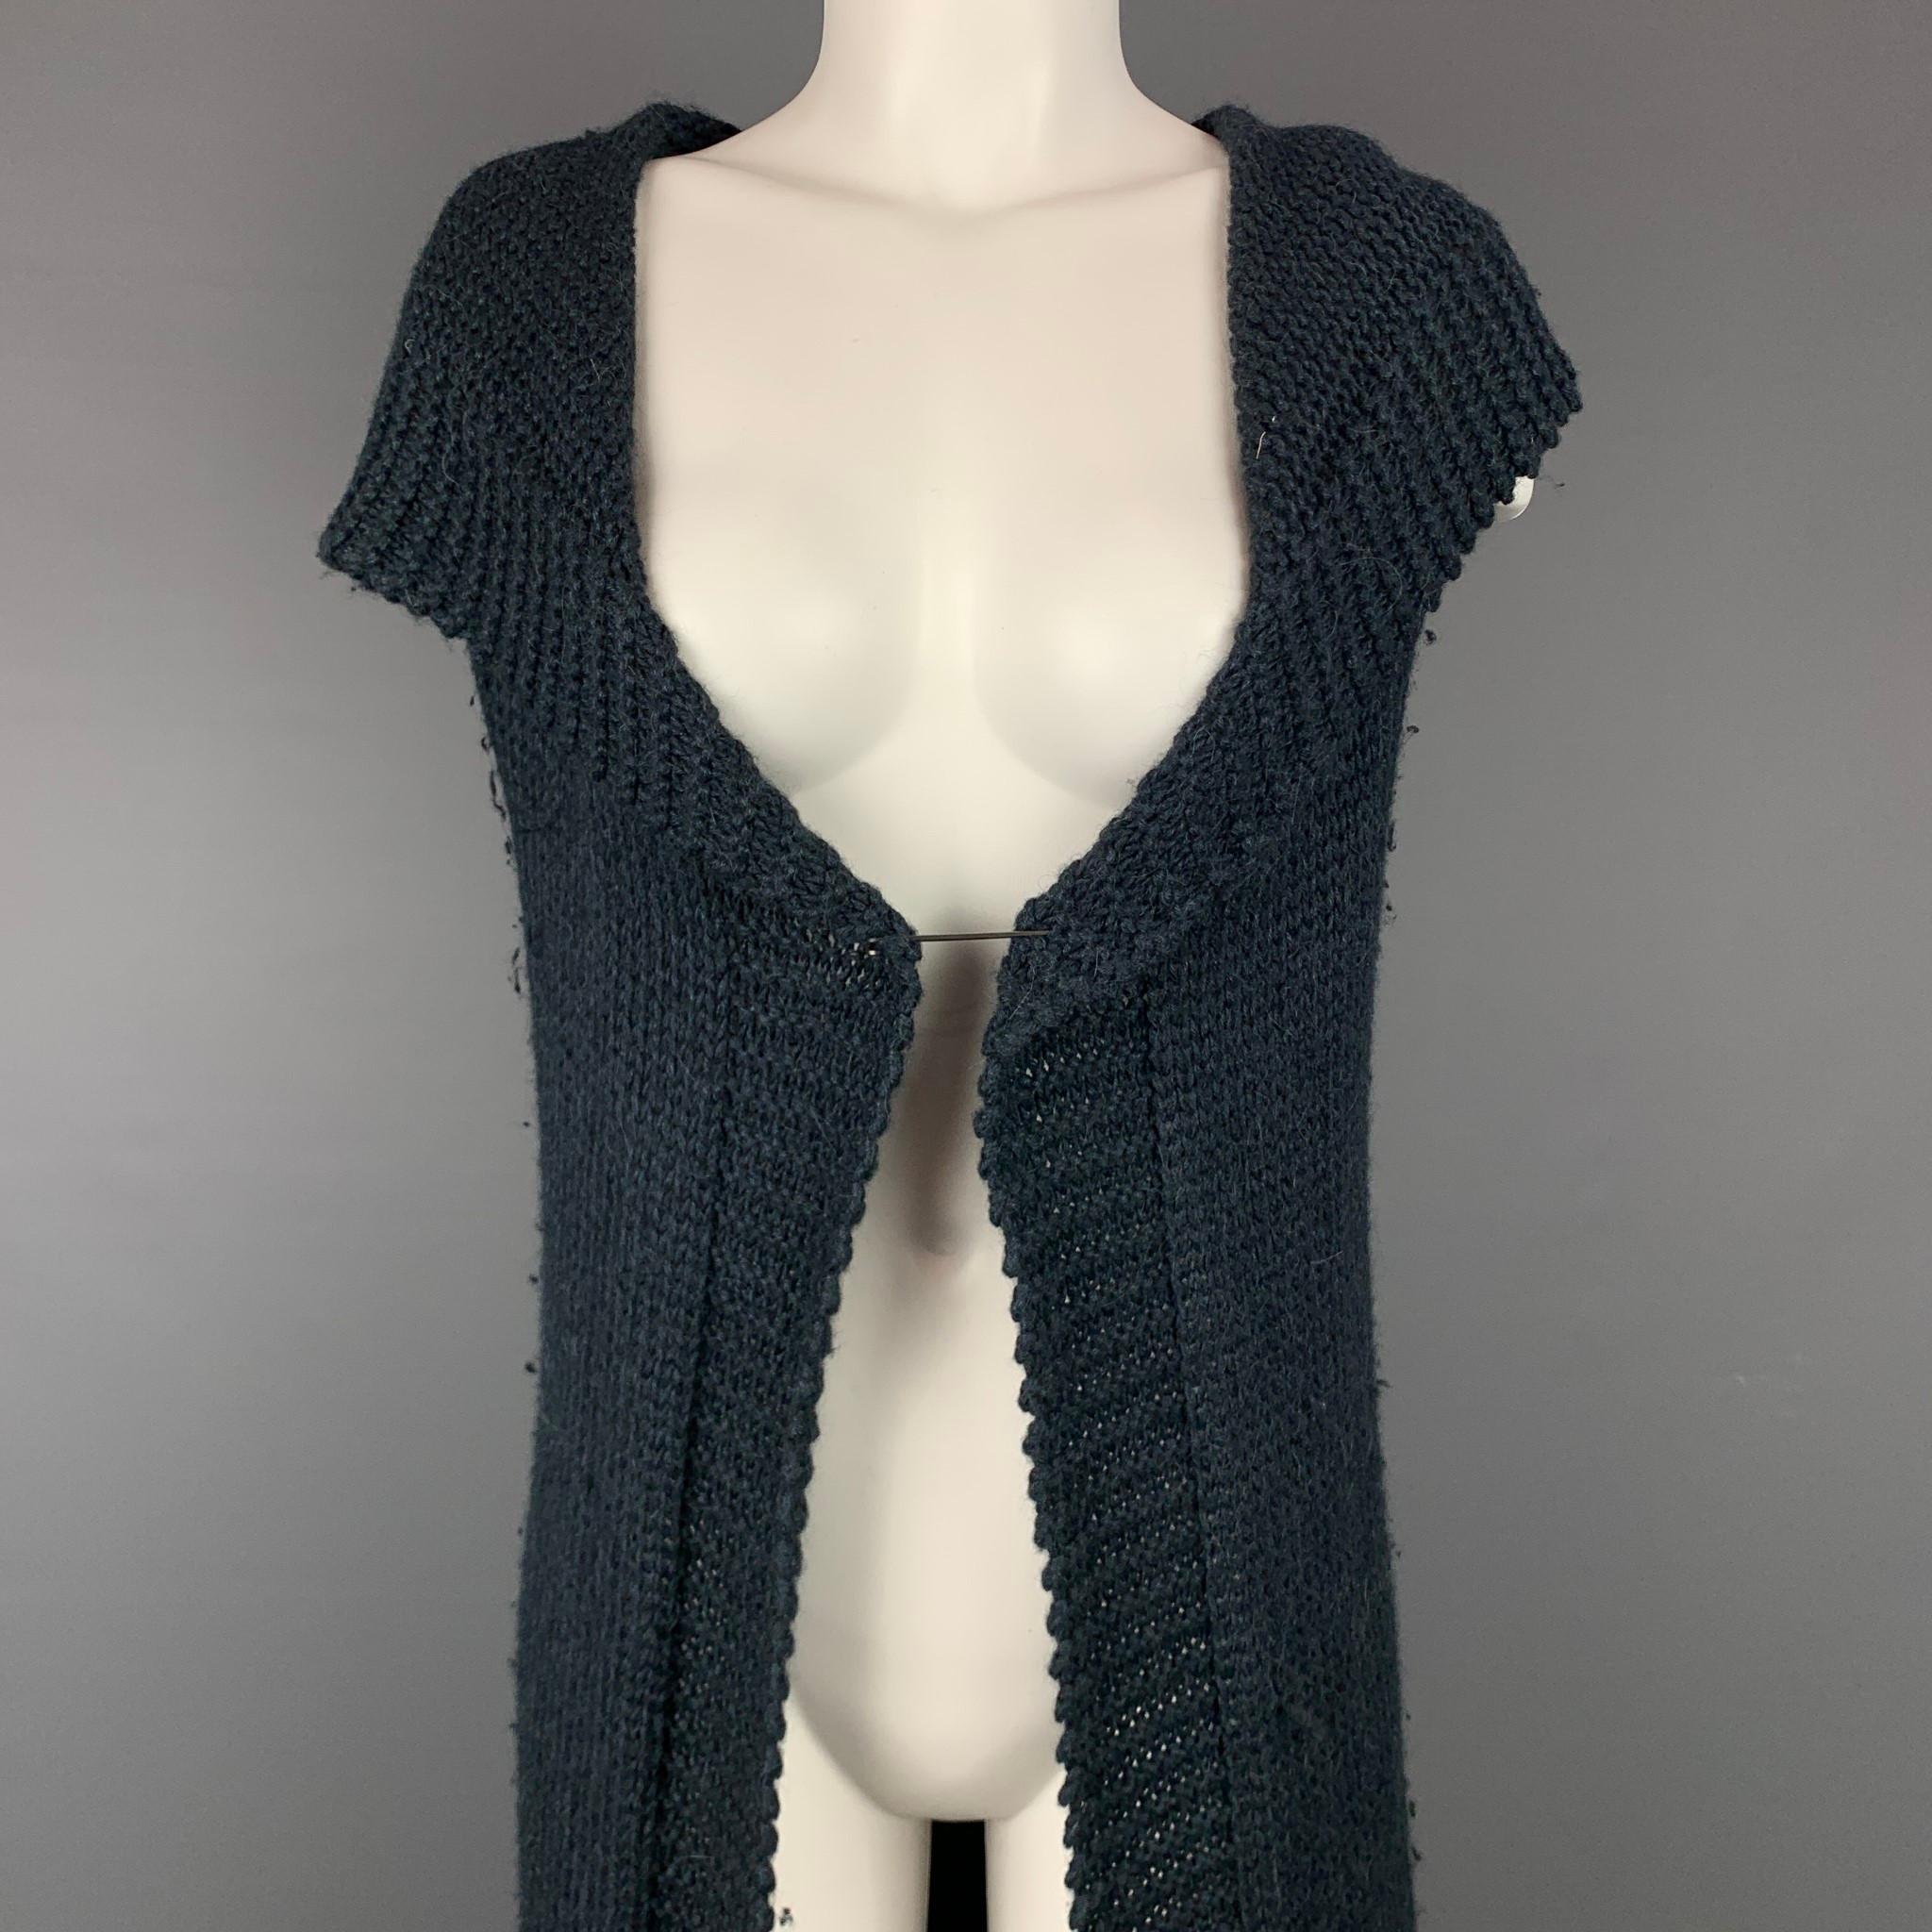 THEORY vest comes in a navy knitted alpaca / silk featuring a hooded, open front, and a safety pin closure detail.

Very Good Pre-Owned Condition.
Marked: S

Measurements:

Shoulder: 17 in.
Bust: 34 in.
Length: 34.5 in. 